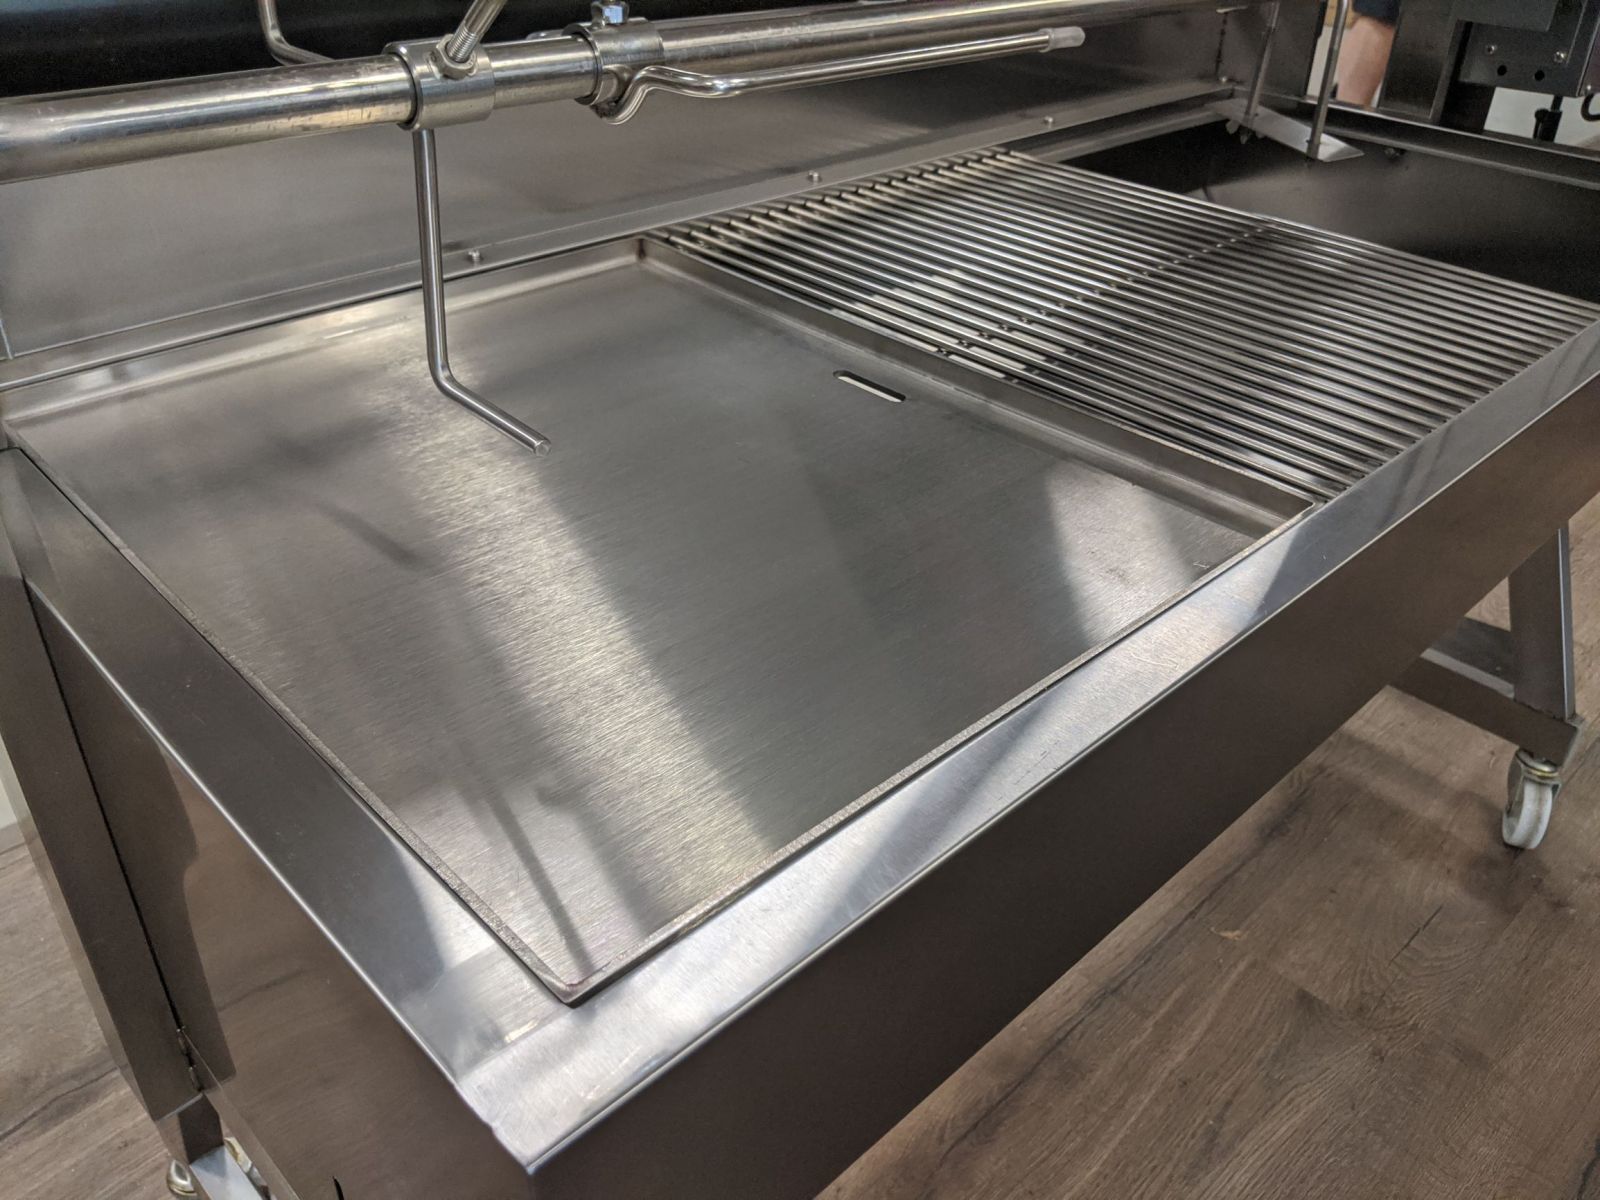 This picture shows the Stainless_Steel_BBQ_Hotplate used in a spit roaster